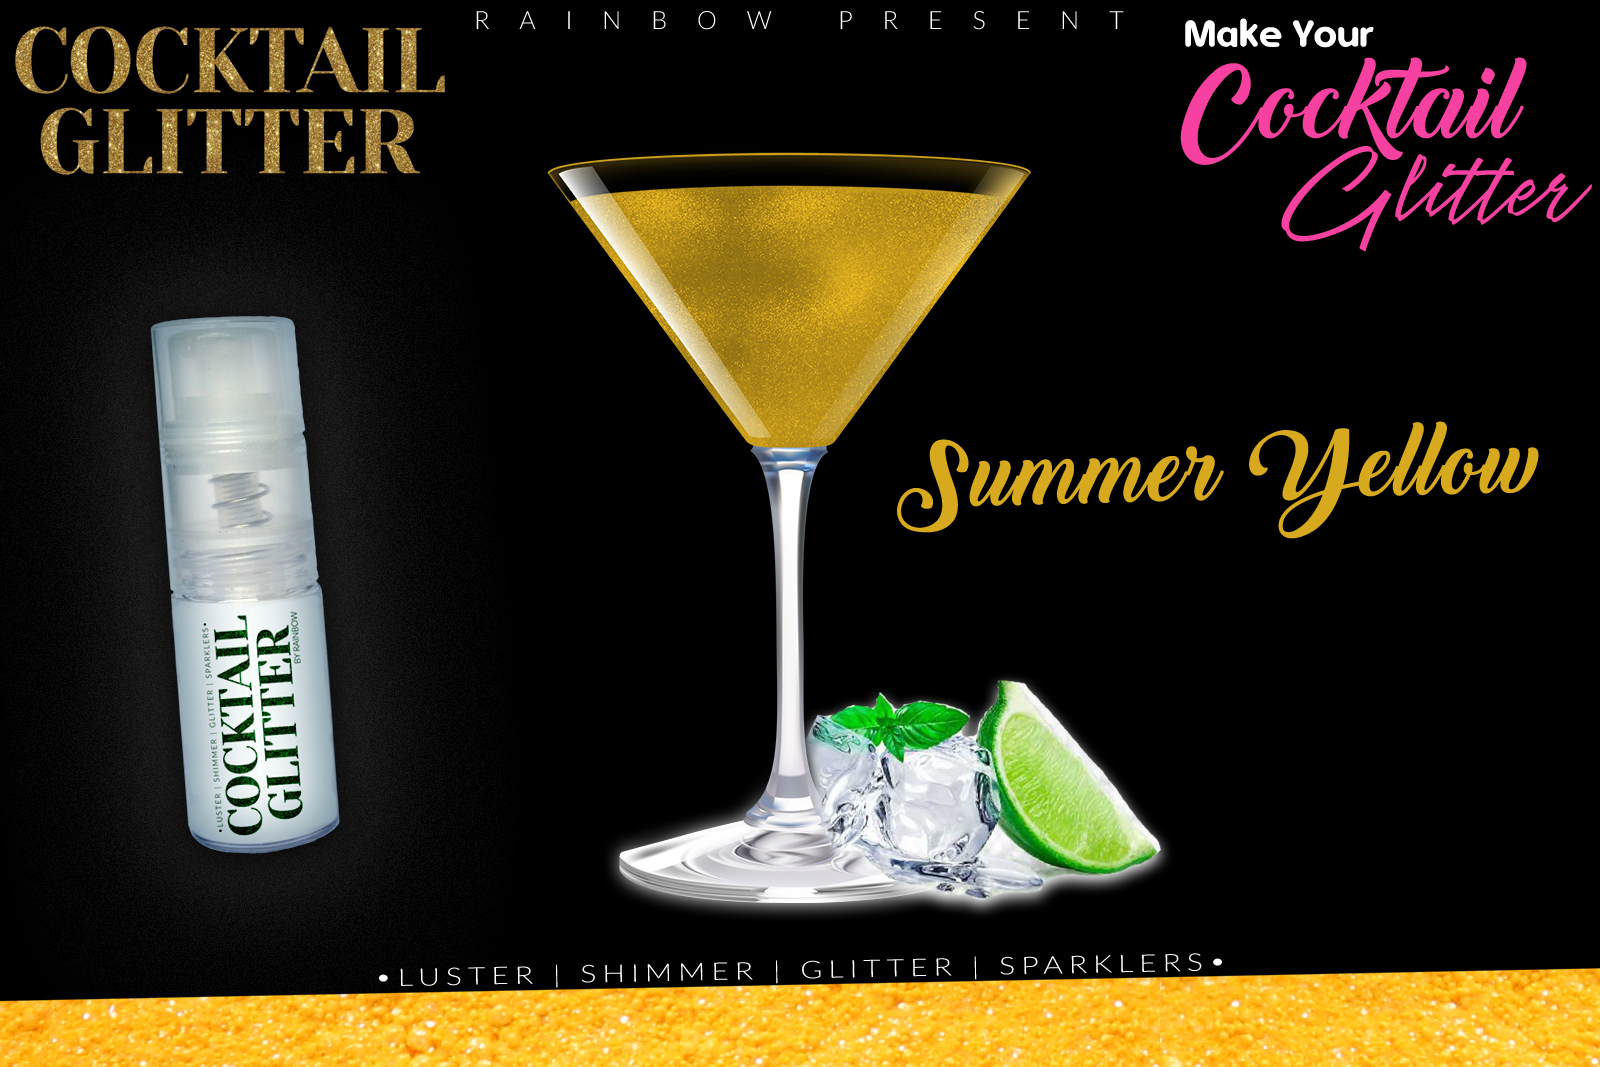 Glitzy Cocktail Glitter and Sparkling Effect | Edible | Summer Yellow